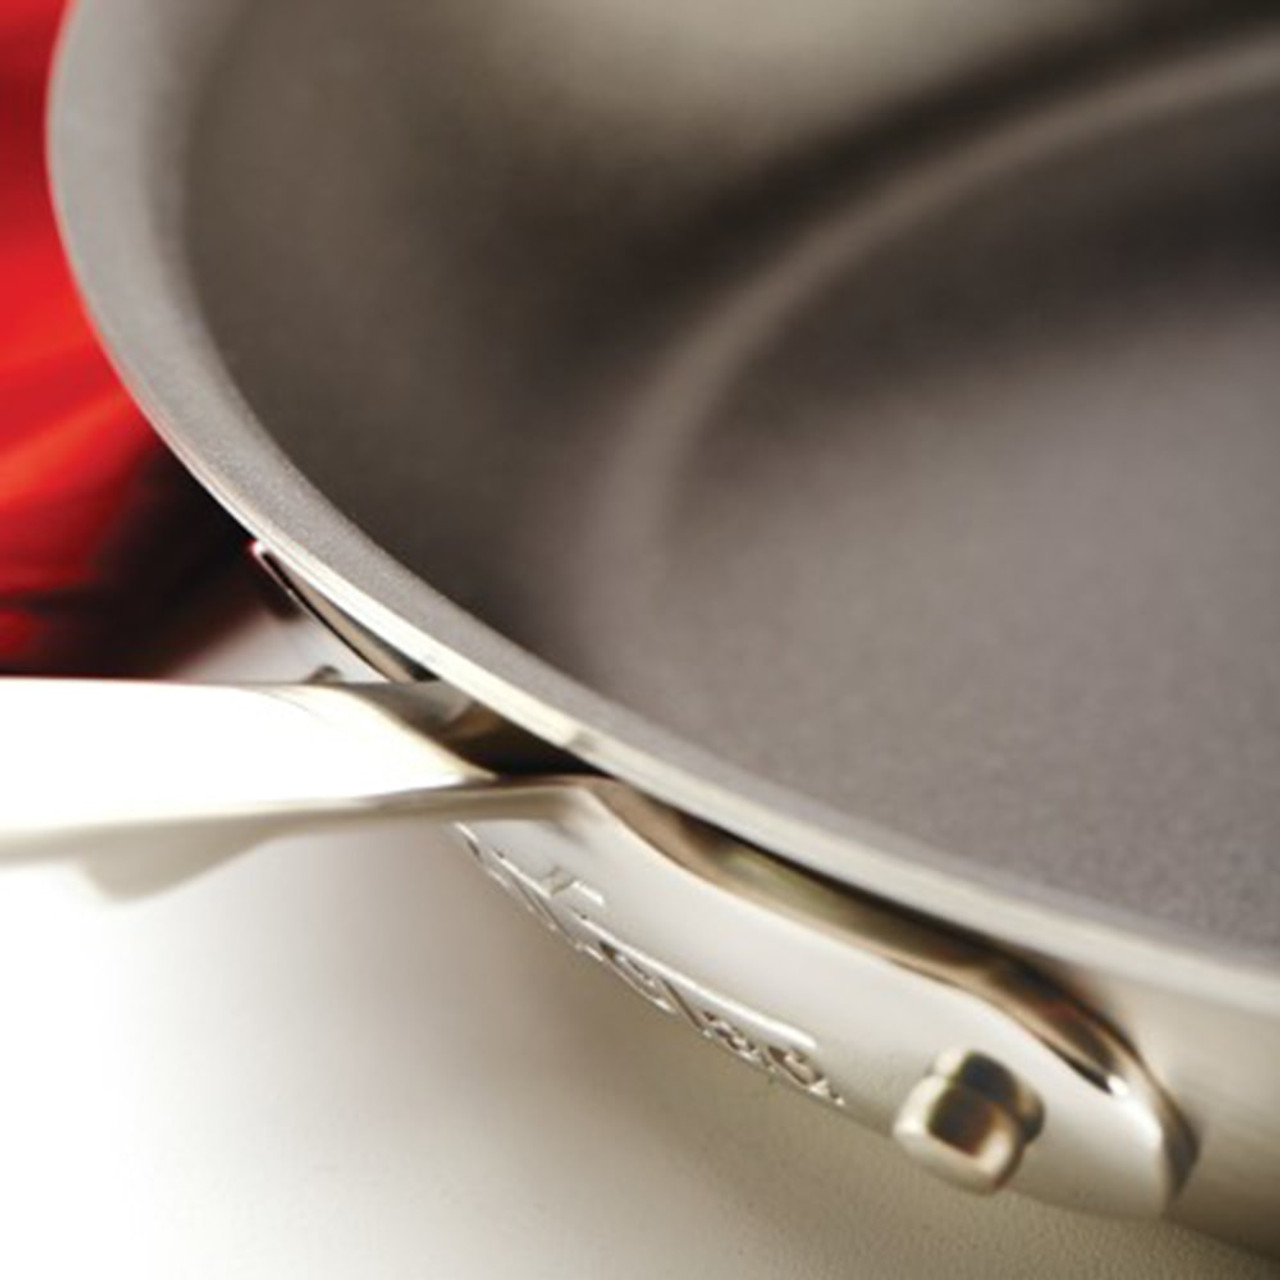 All-Clad d5 Stainless-Steel Nonstick Covered Fry Pan